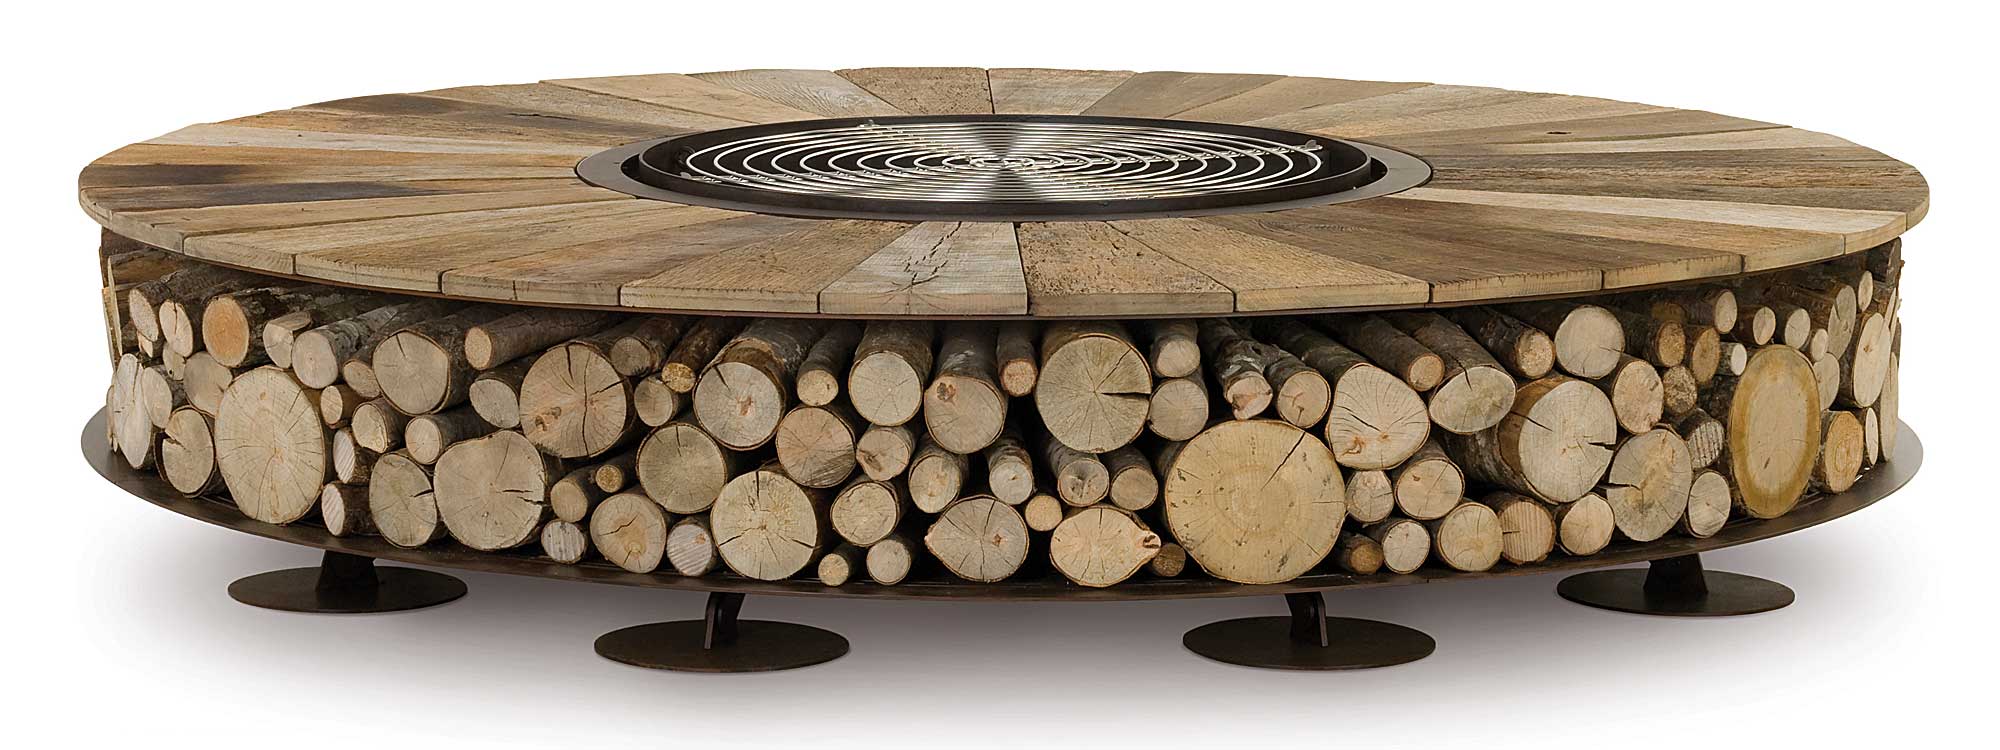 Studio Shot Of Zero WOOD FIRE PIT & Optional Stainless Steel BBQ Grill, Designed By Ivano Losa. Zero Wood MINIMALIST Outdoor Fireplace Is Avalailable In 3 Different Sizes Of 1.5, 2.0 & 3.0M Diametre. Zero Wood MODERN Garden Fire Pit Is Made In LUXURY Fire Pit MATERIALS By AK47 Fire Pits Company, Italy.